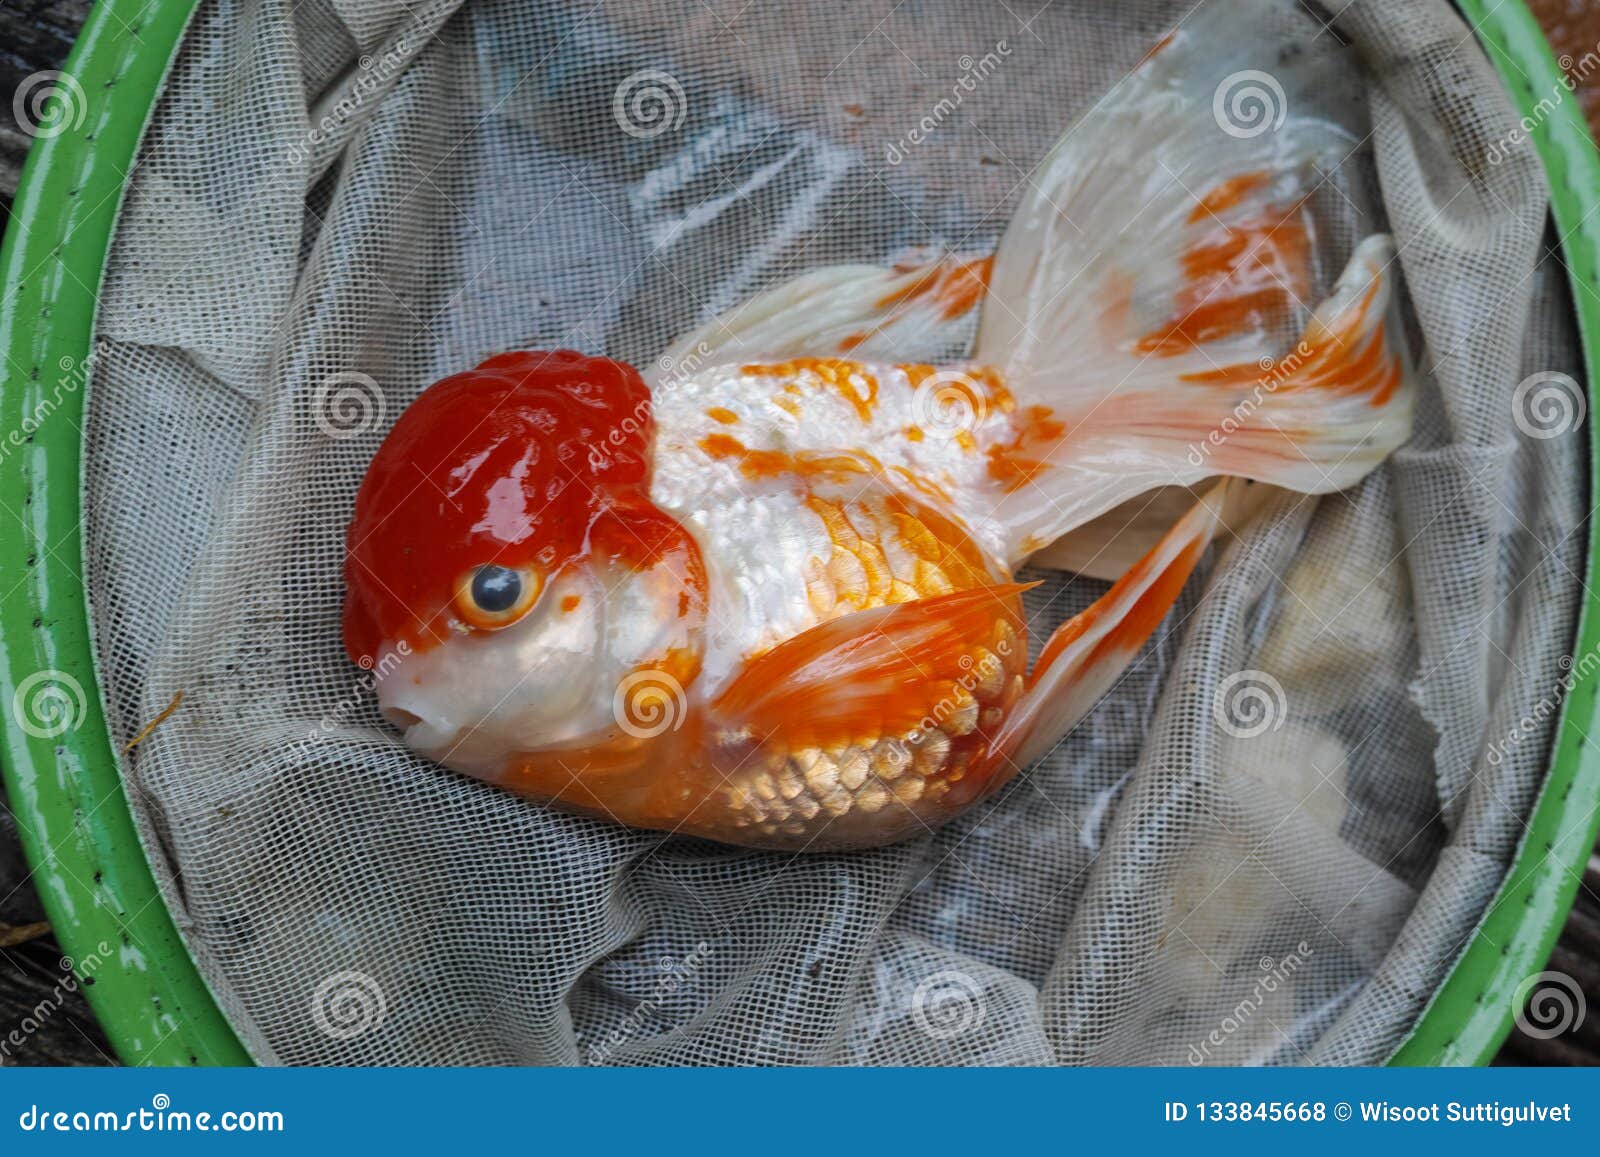 How To Dispose Of Dead Koi Fish Help Is My Koi Sick Diagnose Symptoms